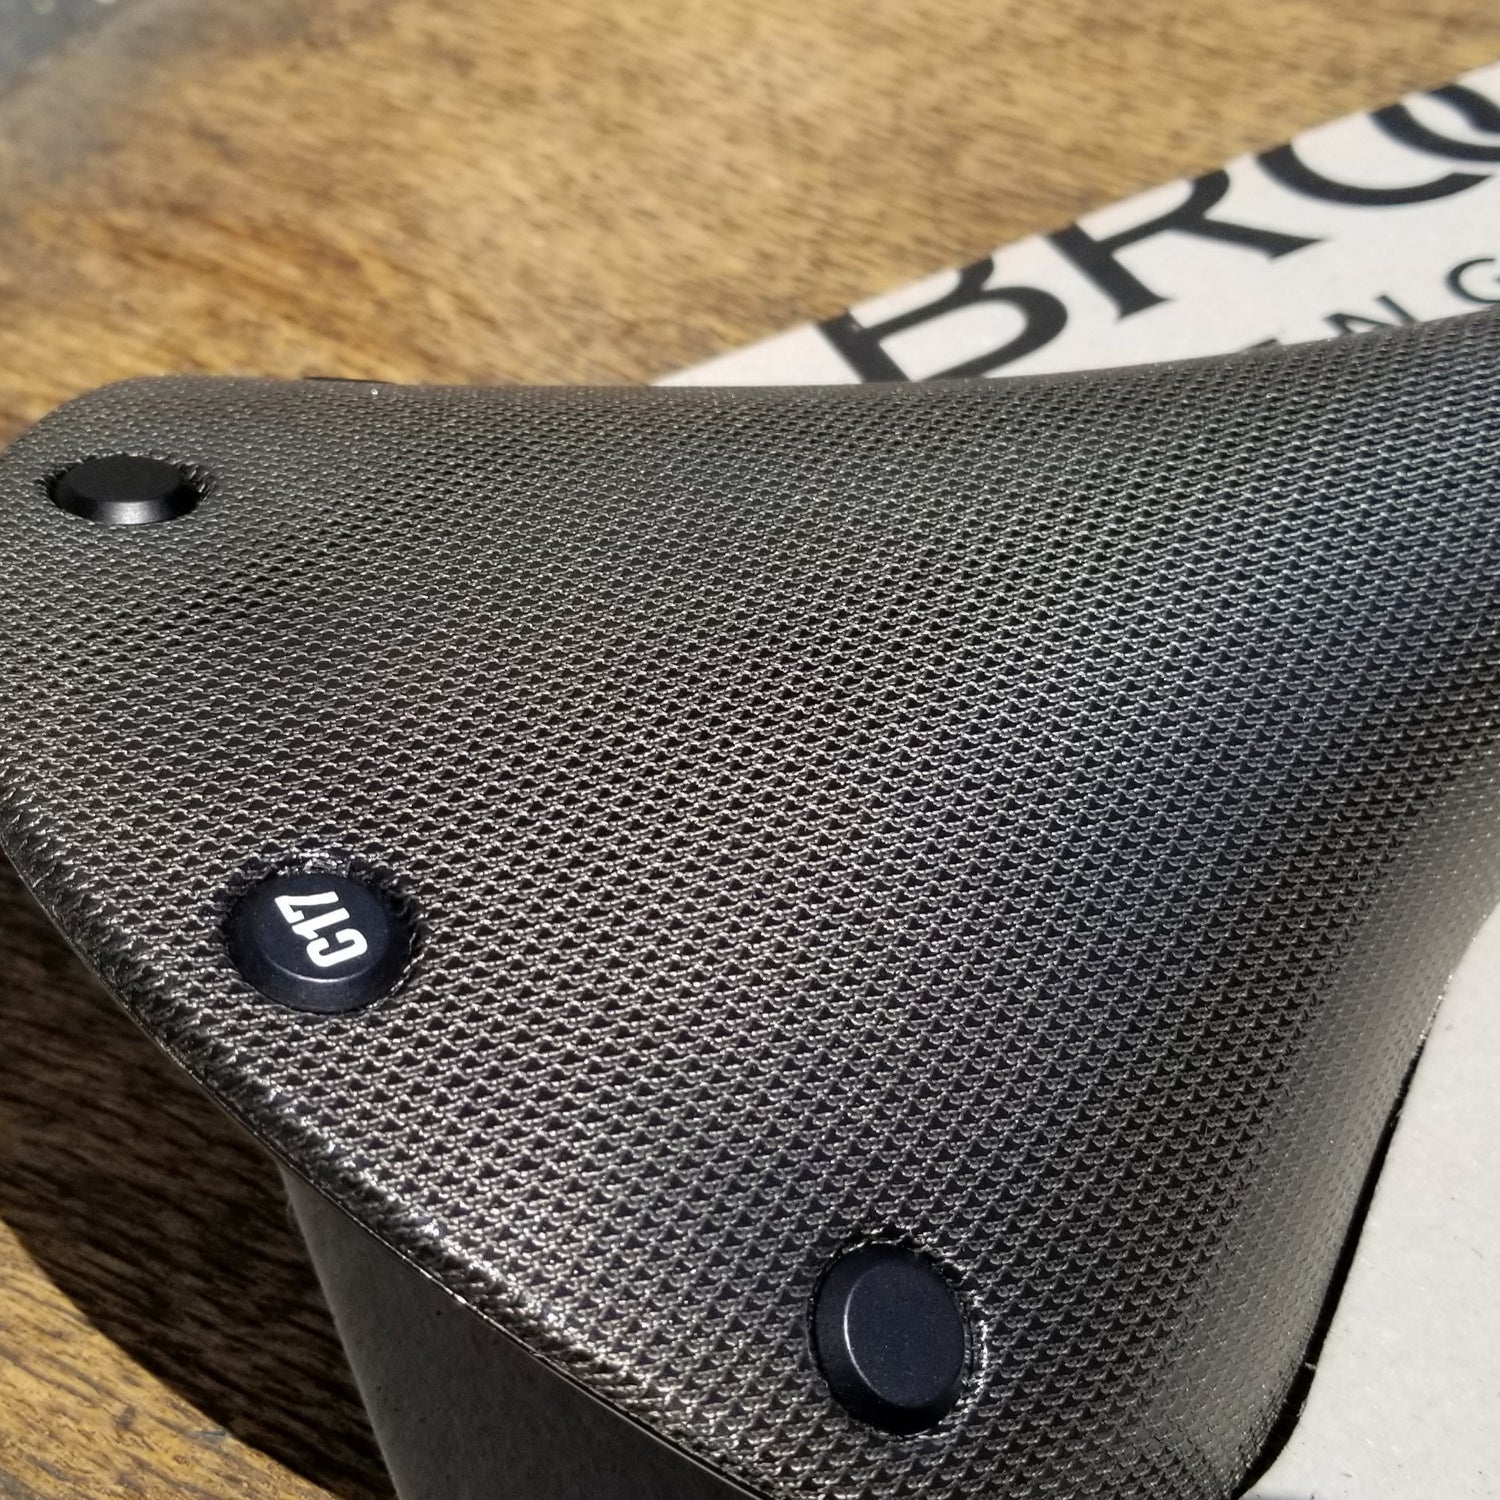 Brooks Cambium Saddles - Learn About and Purchase – Rivendell